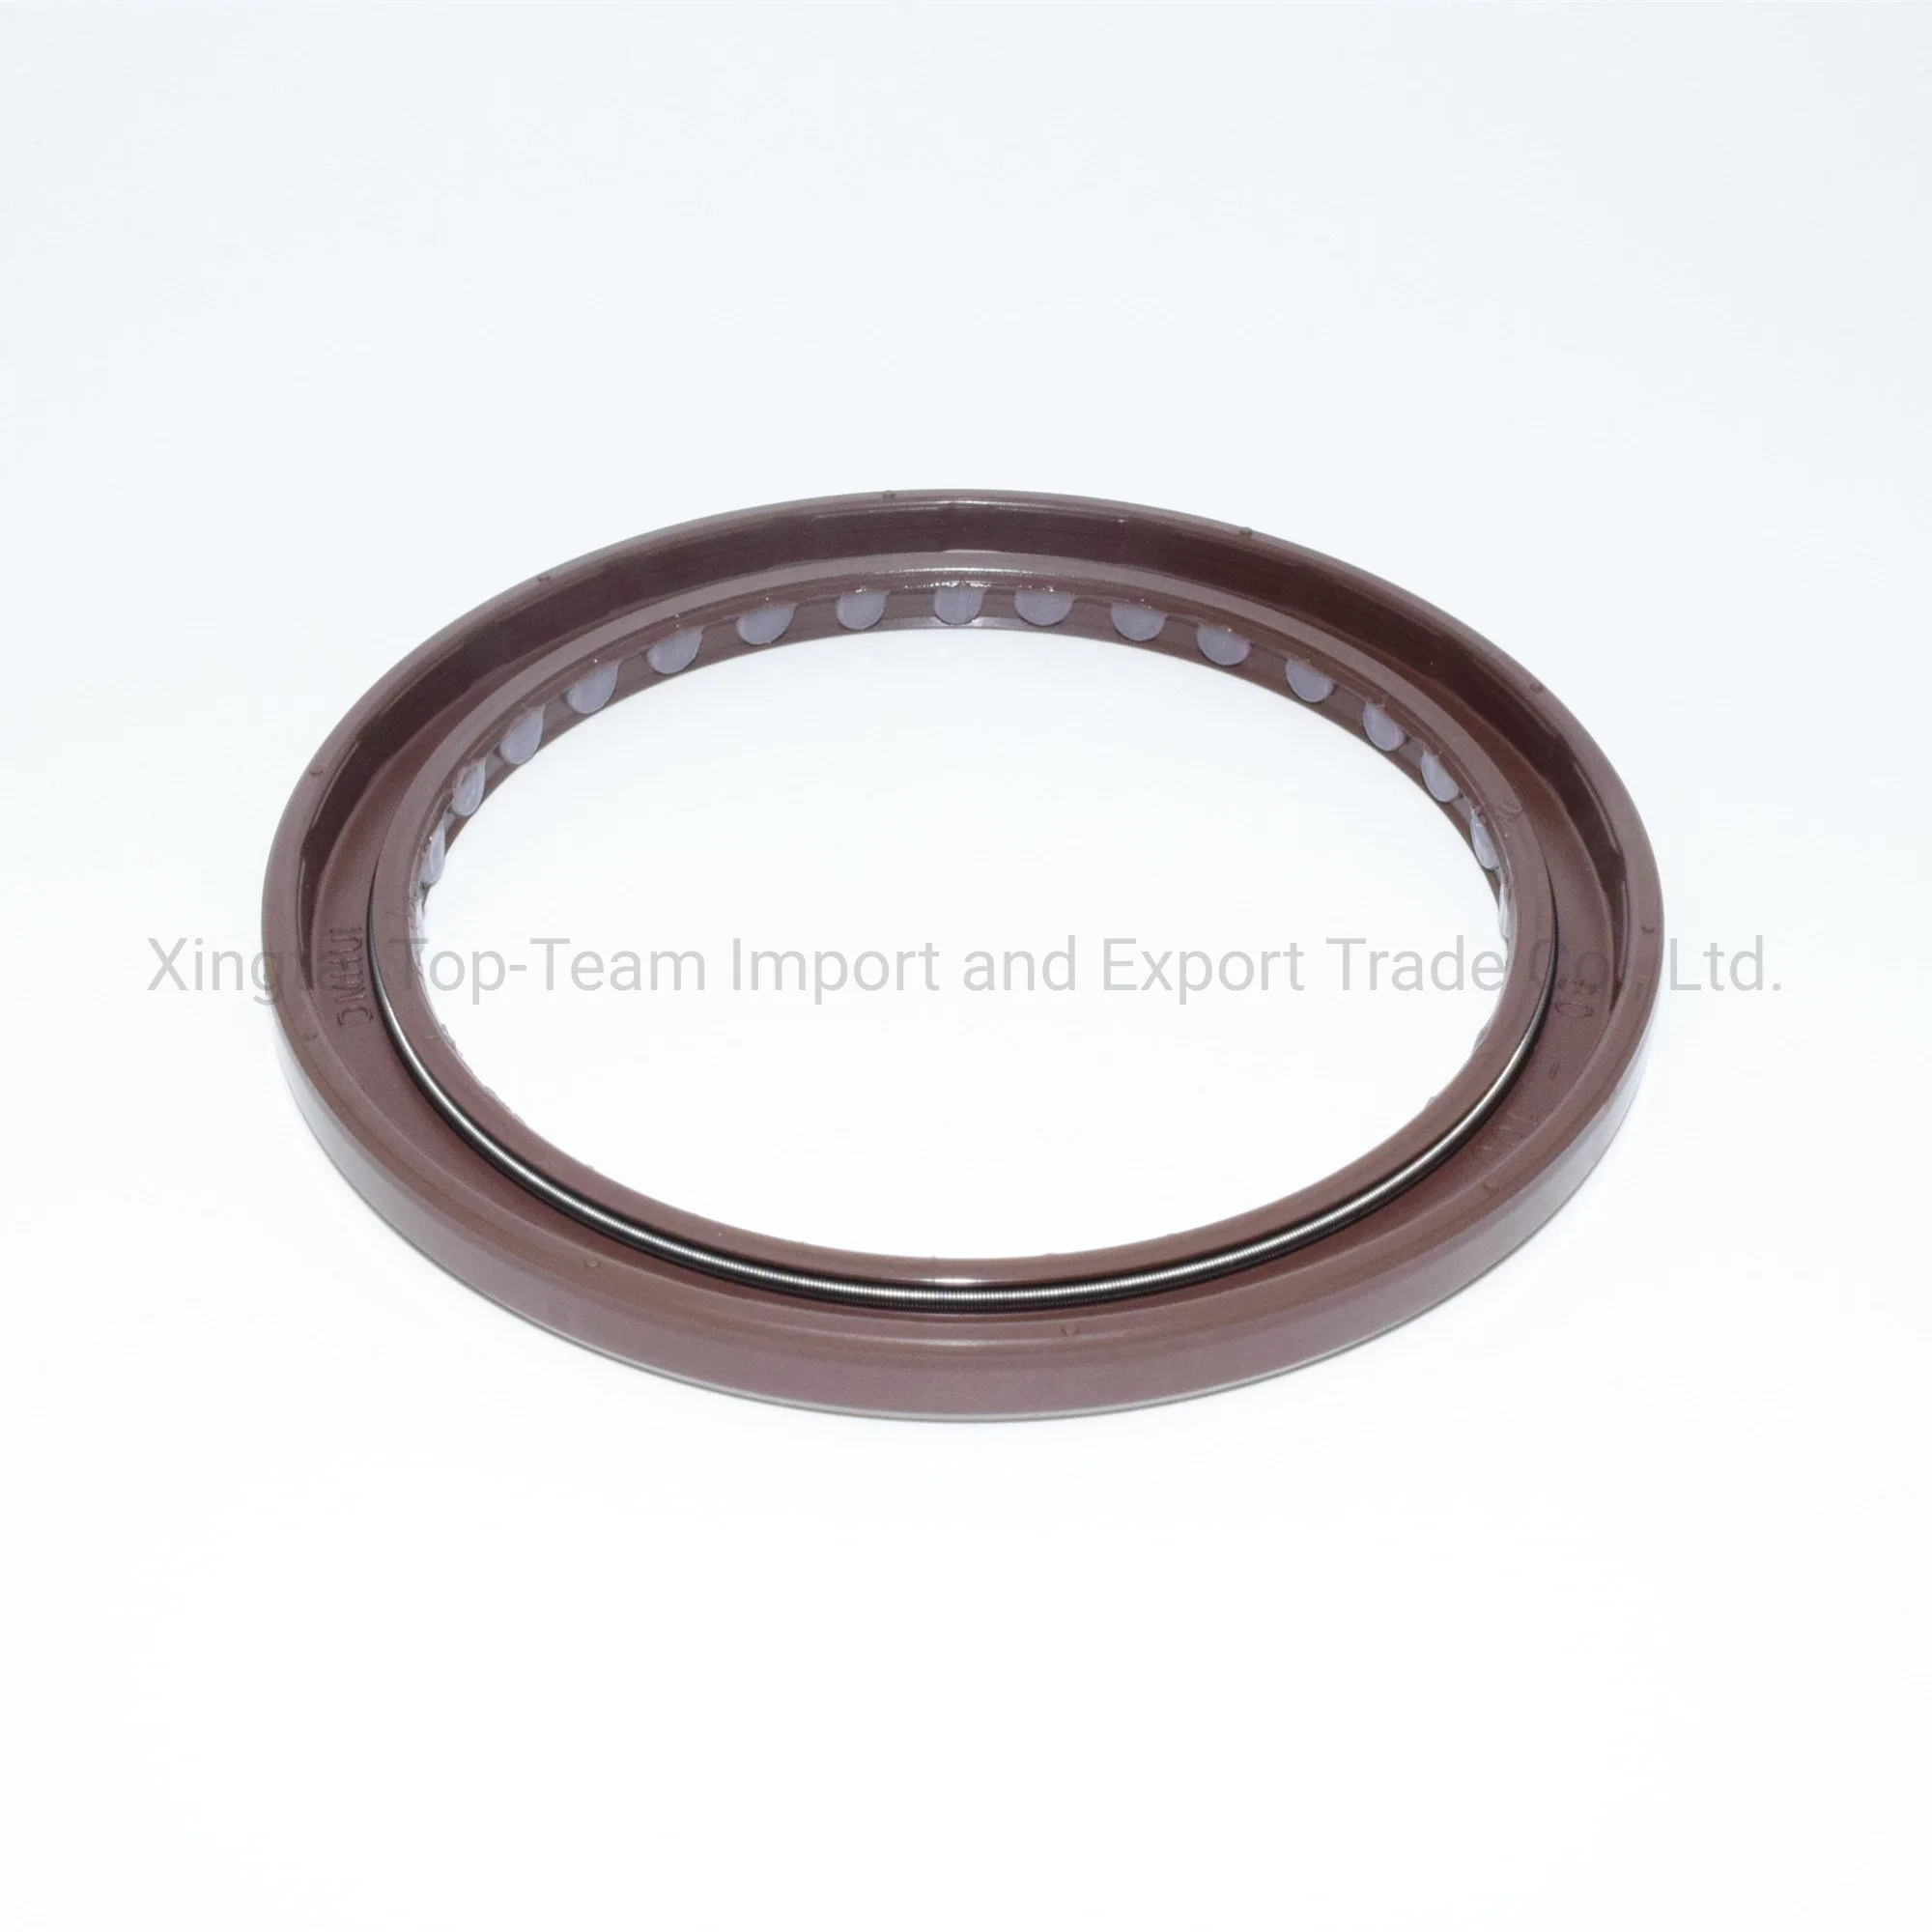 Dmhui Security Seals with FKM Material Bafsl1sf Type for A4vso355 Pump Rubber Oil Seals